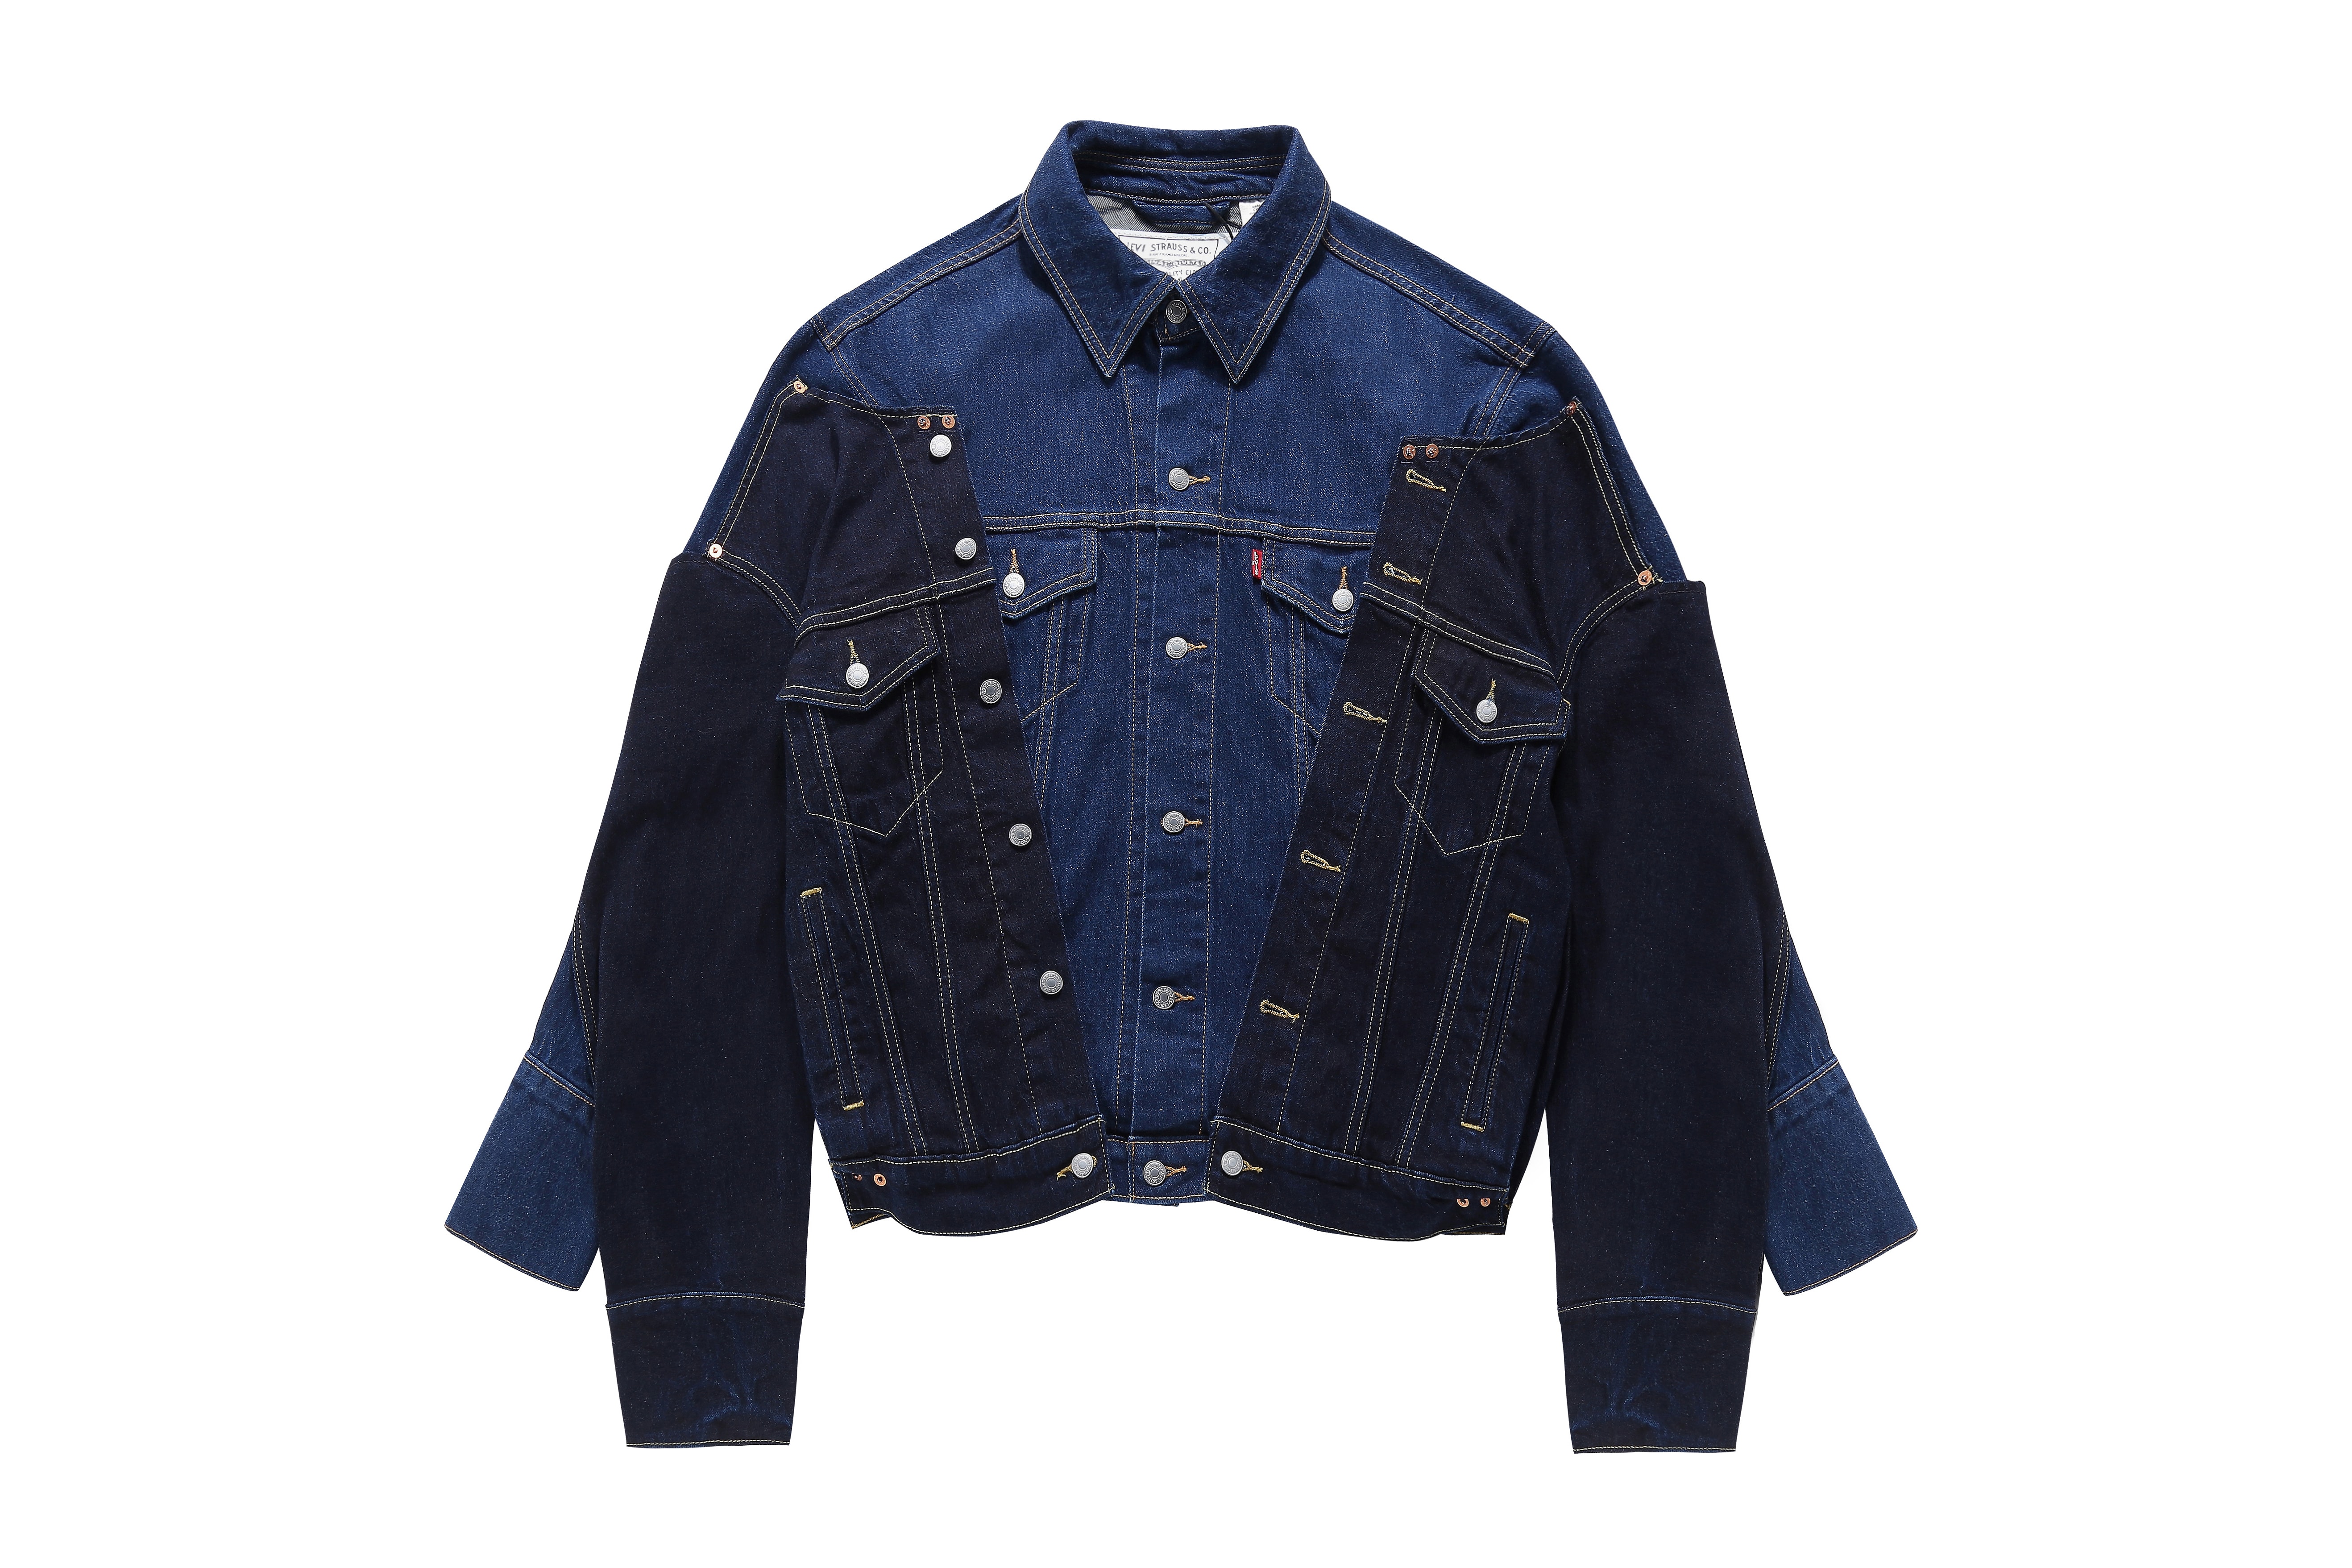 Feng Cheng Wang x Levis Collaboration Release Denim Repurposed 